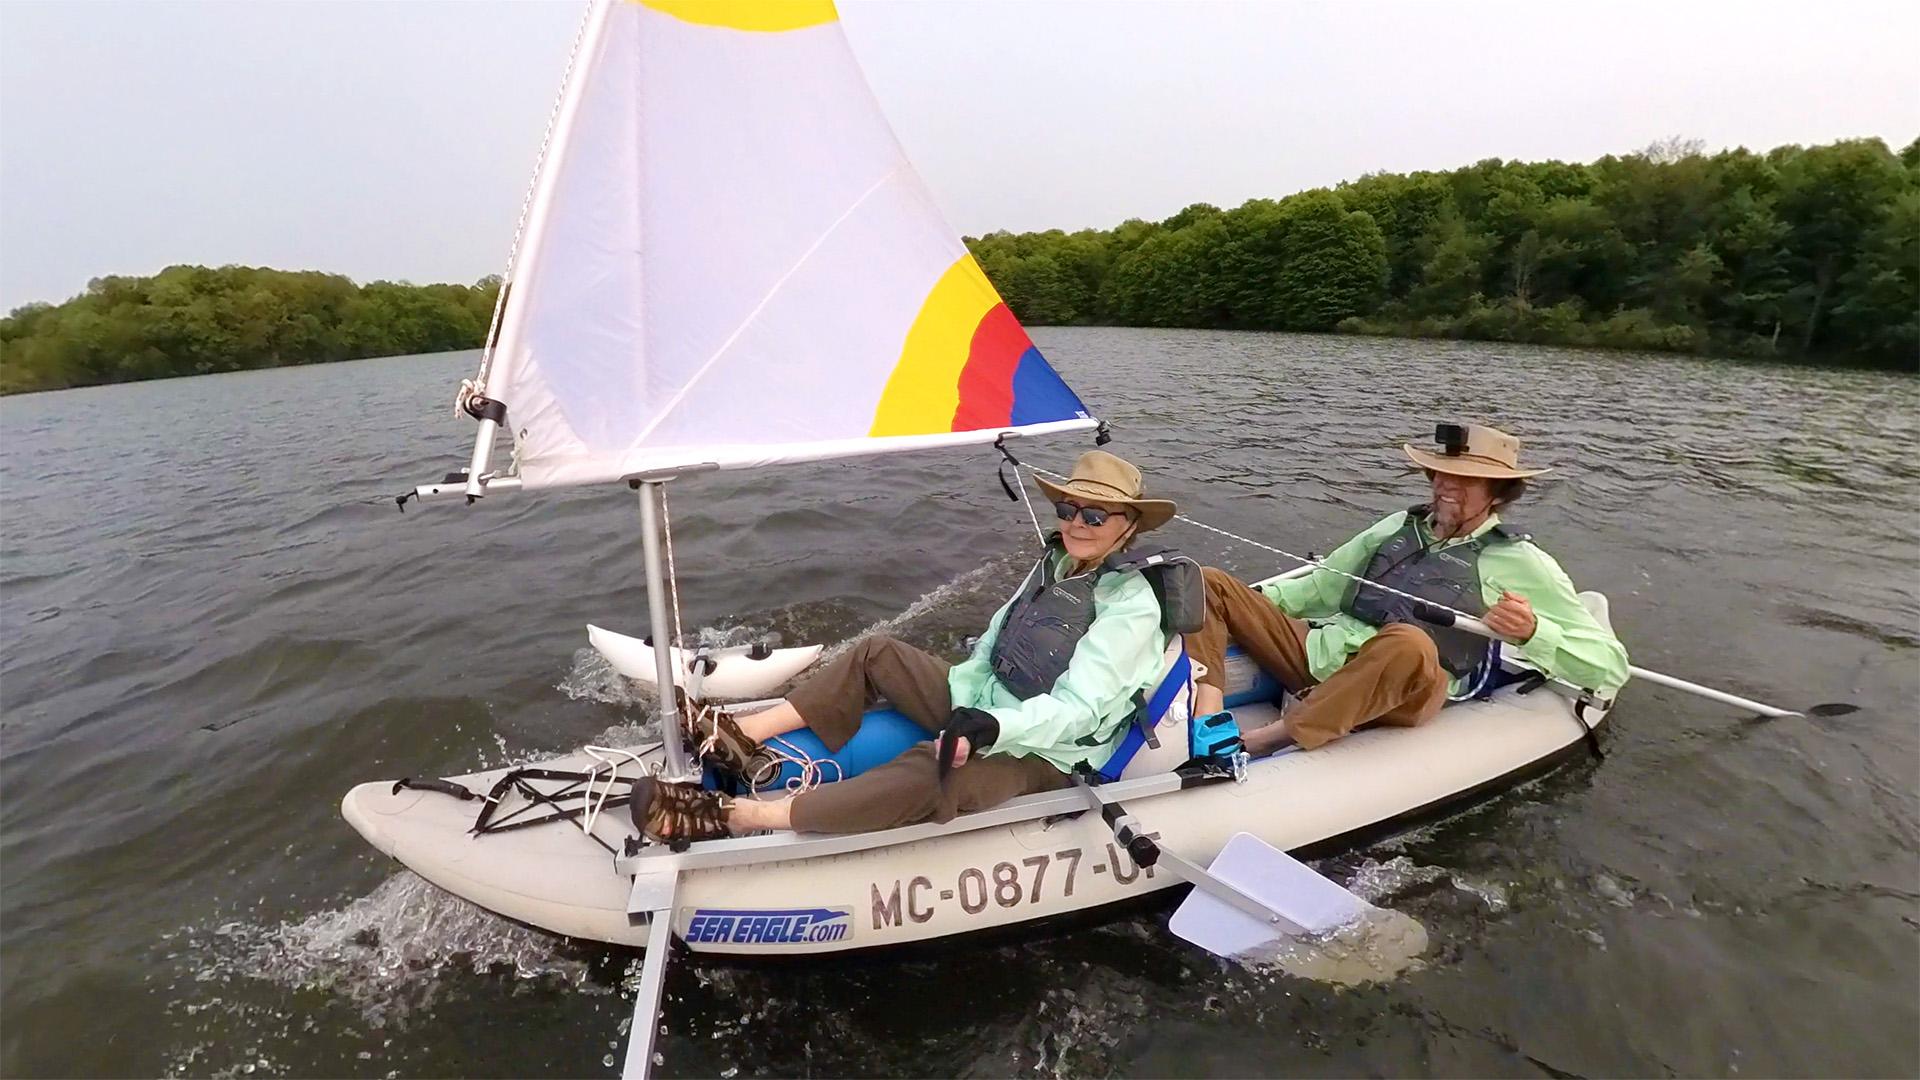 How to Turn an Inflatable Kayak into a Sailboat